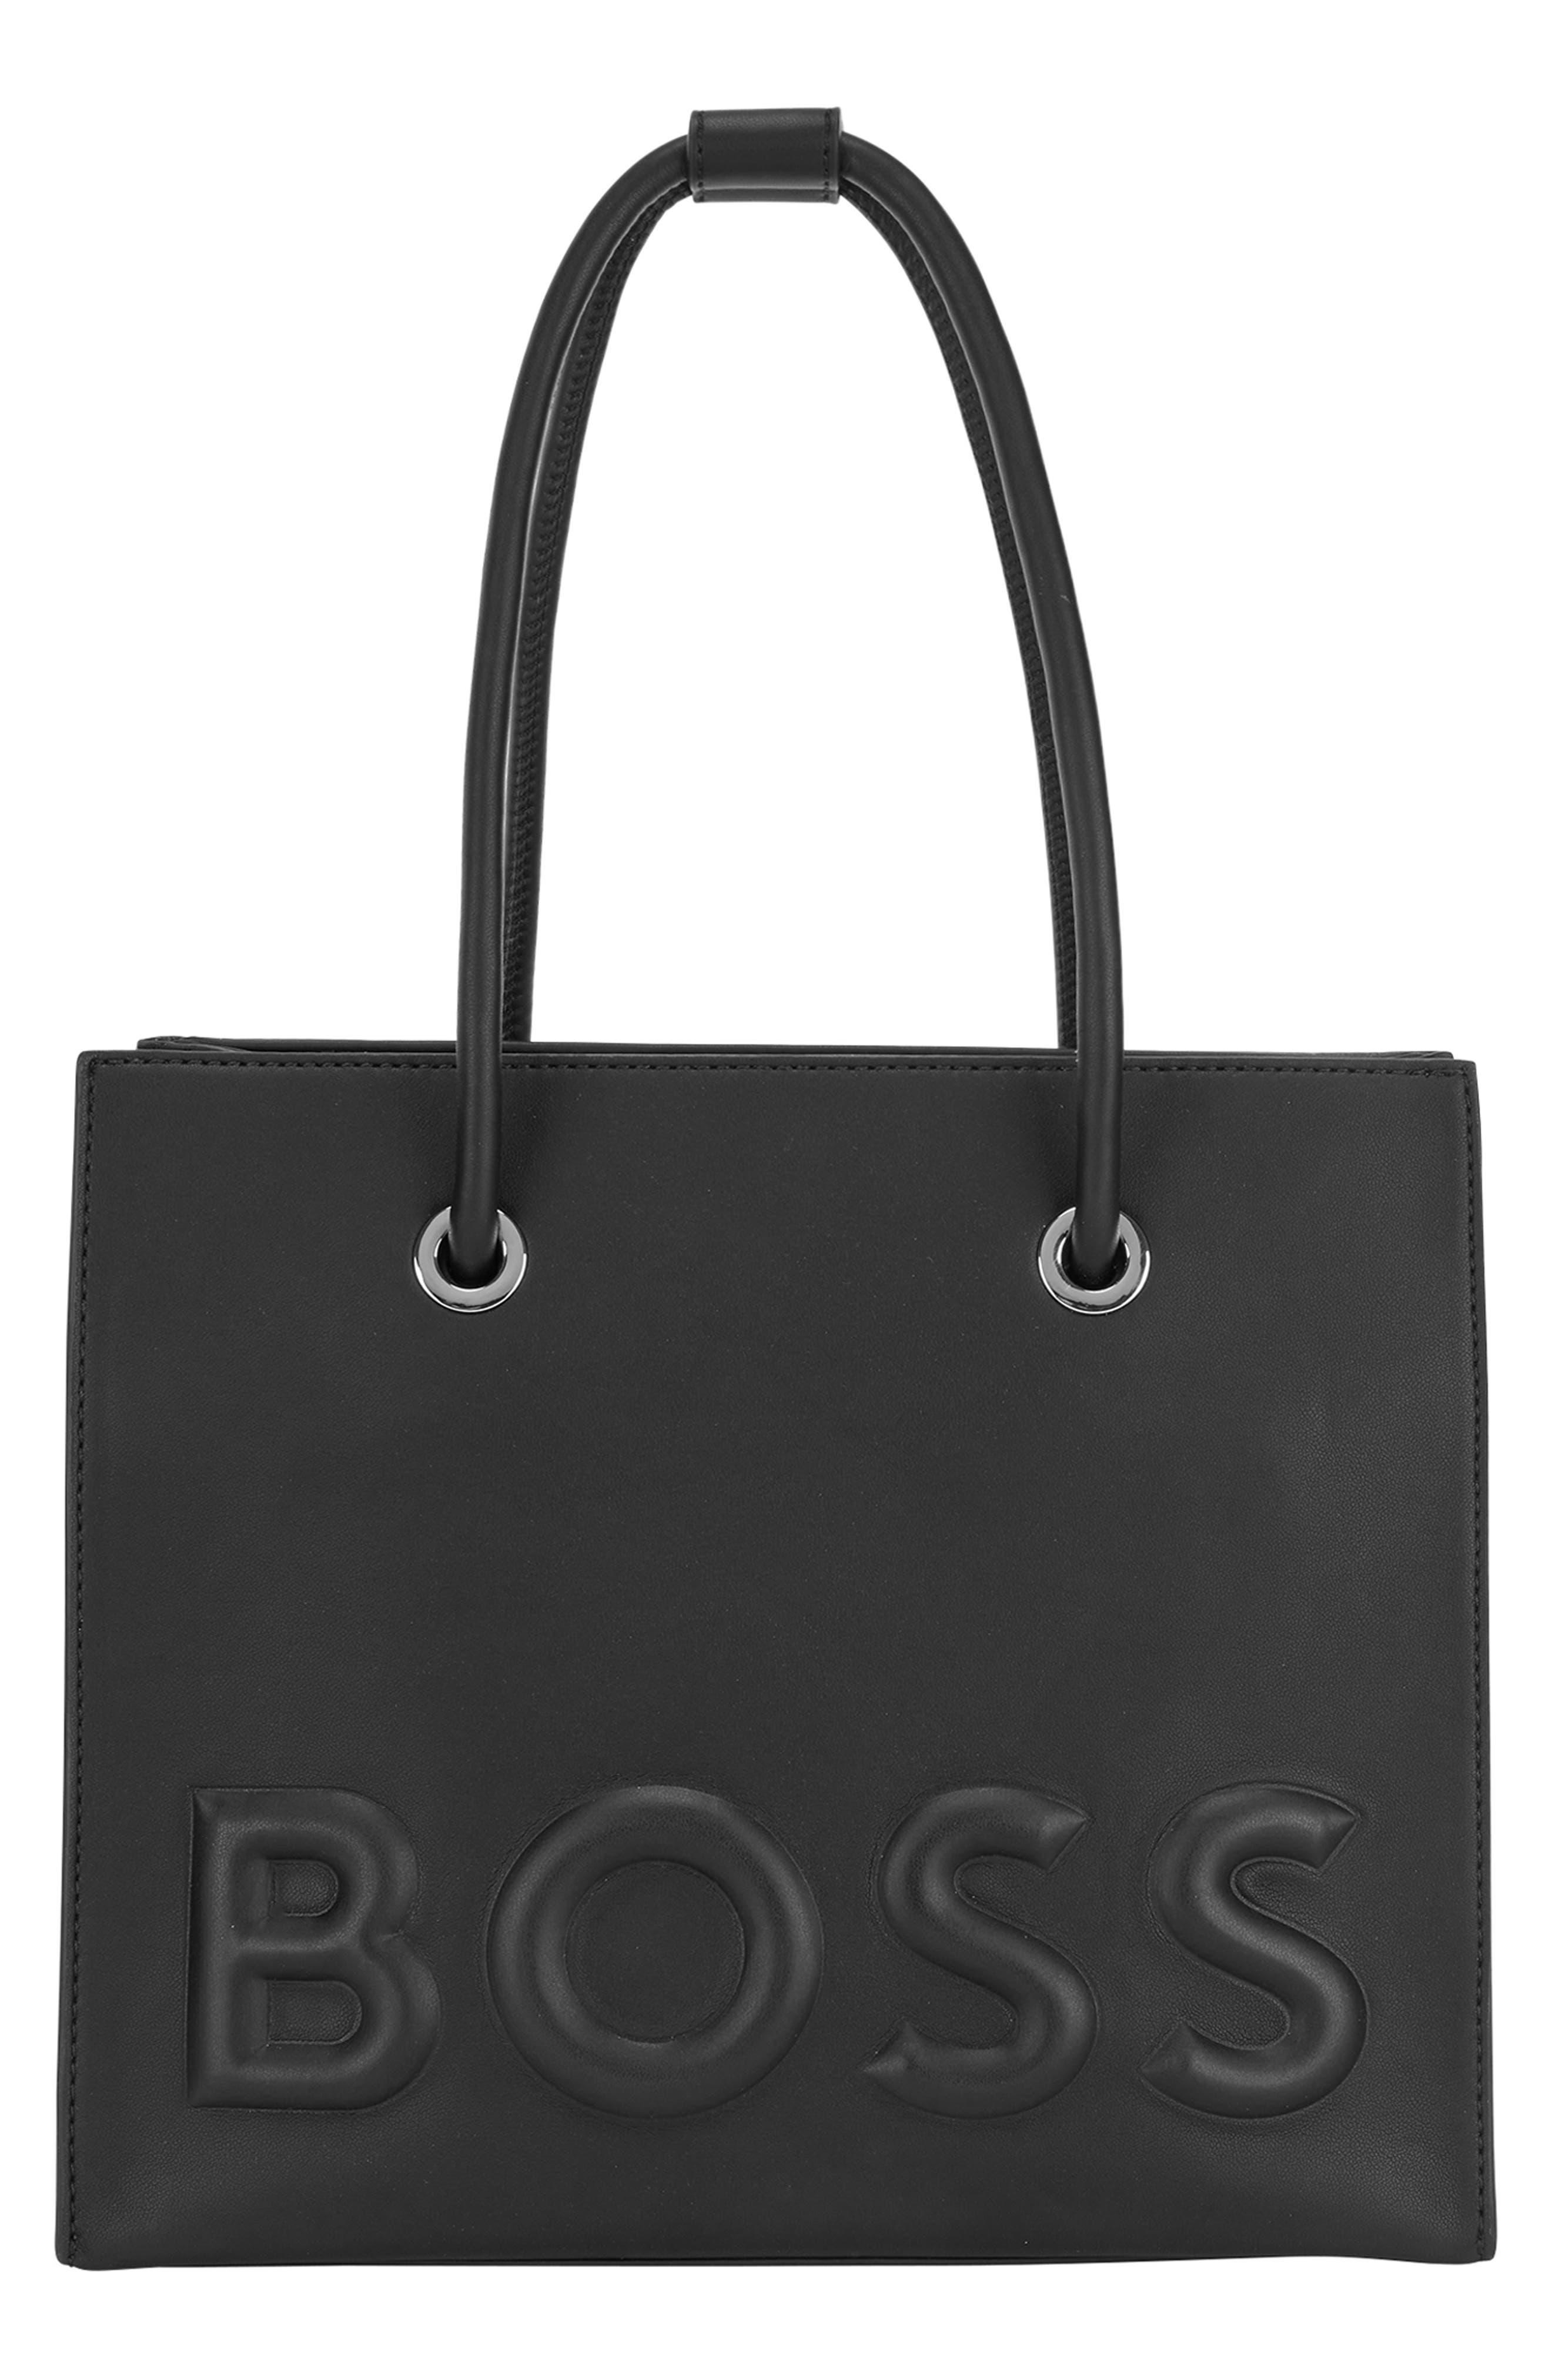 BOSS by HUGO BOSS Susan Small Faux Leather Tote in Black | Lyst